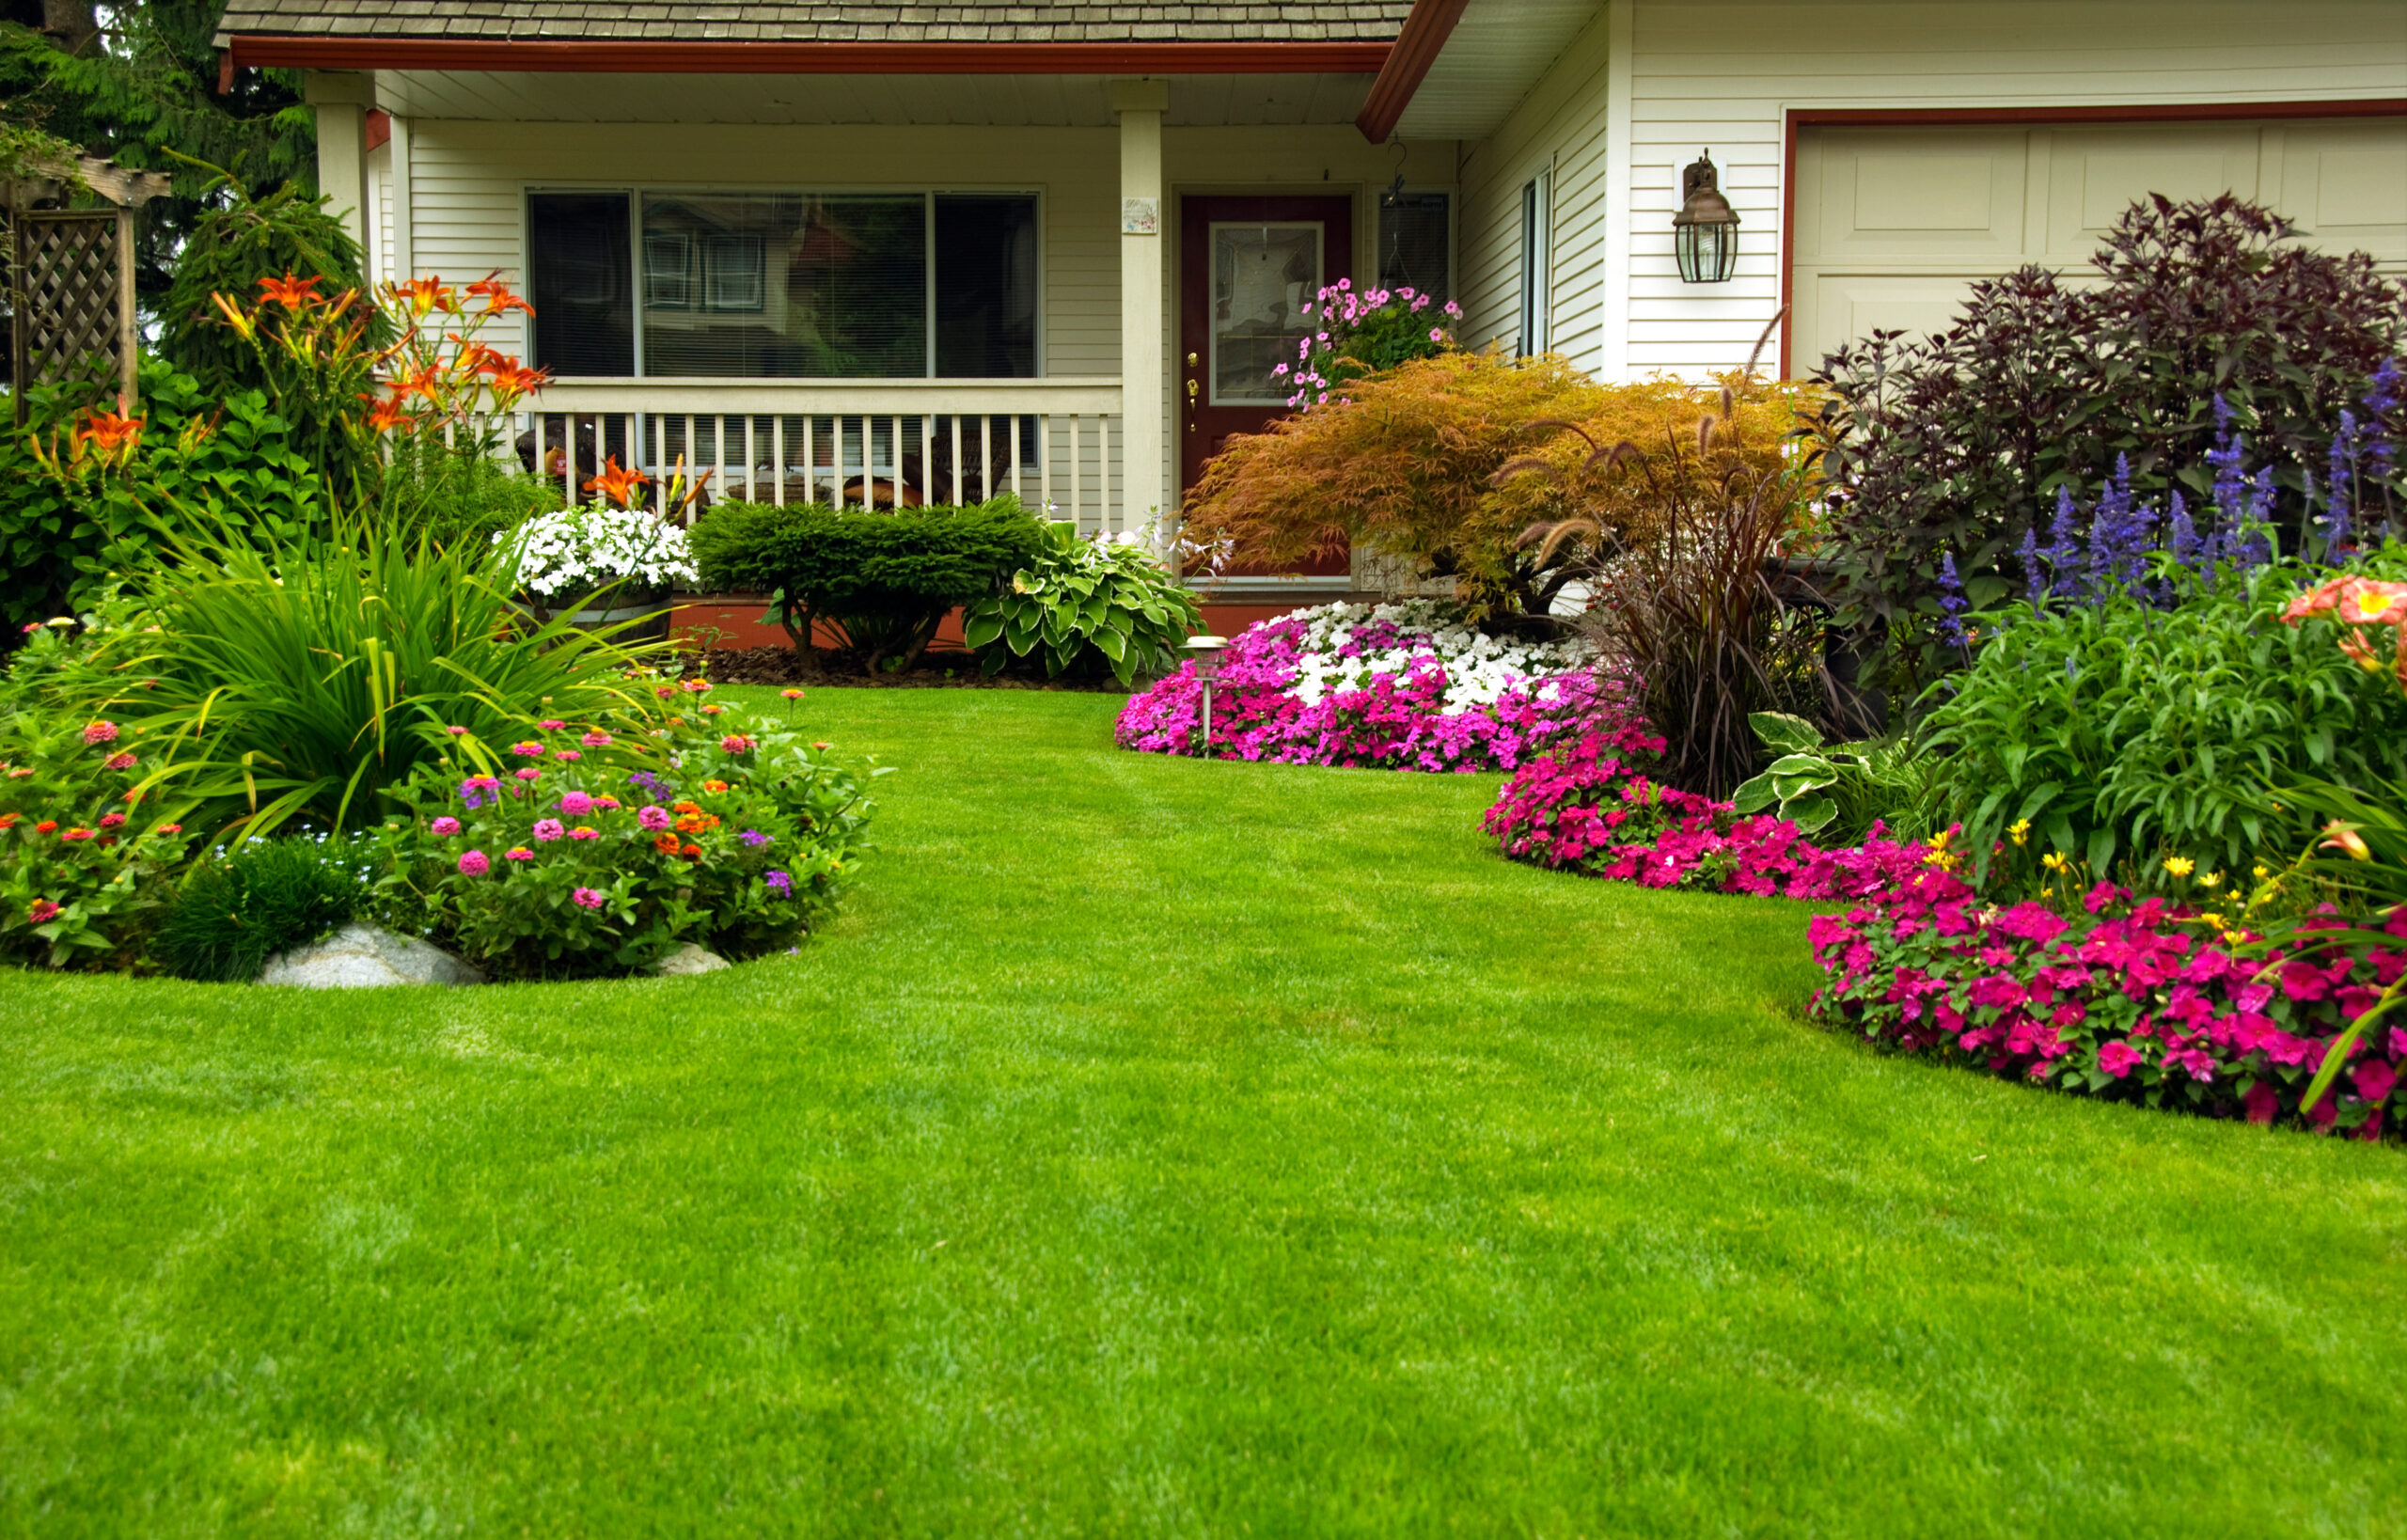 Clean Planet Spring Lawn Care: Conquer Weeds and Pests